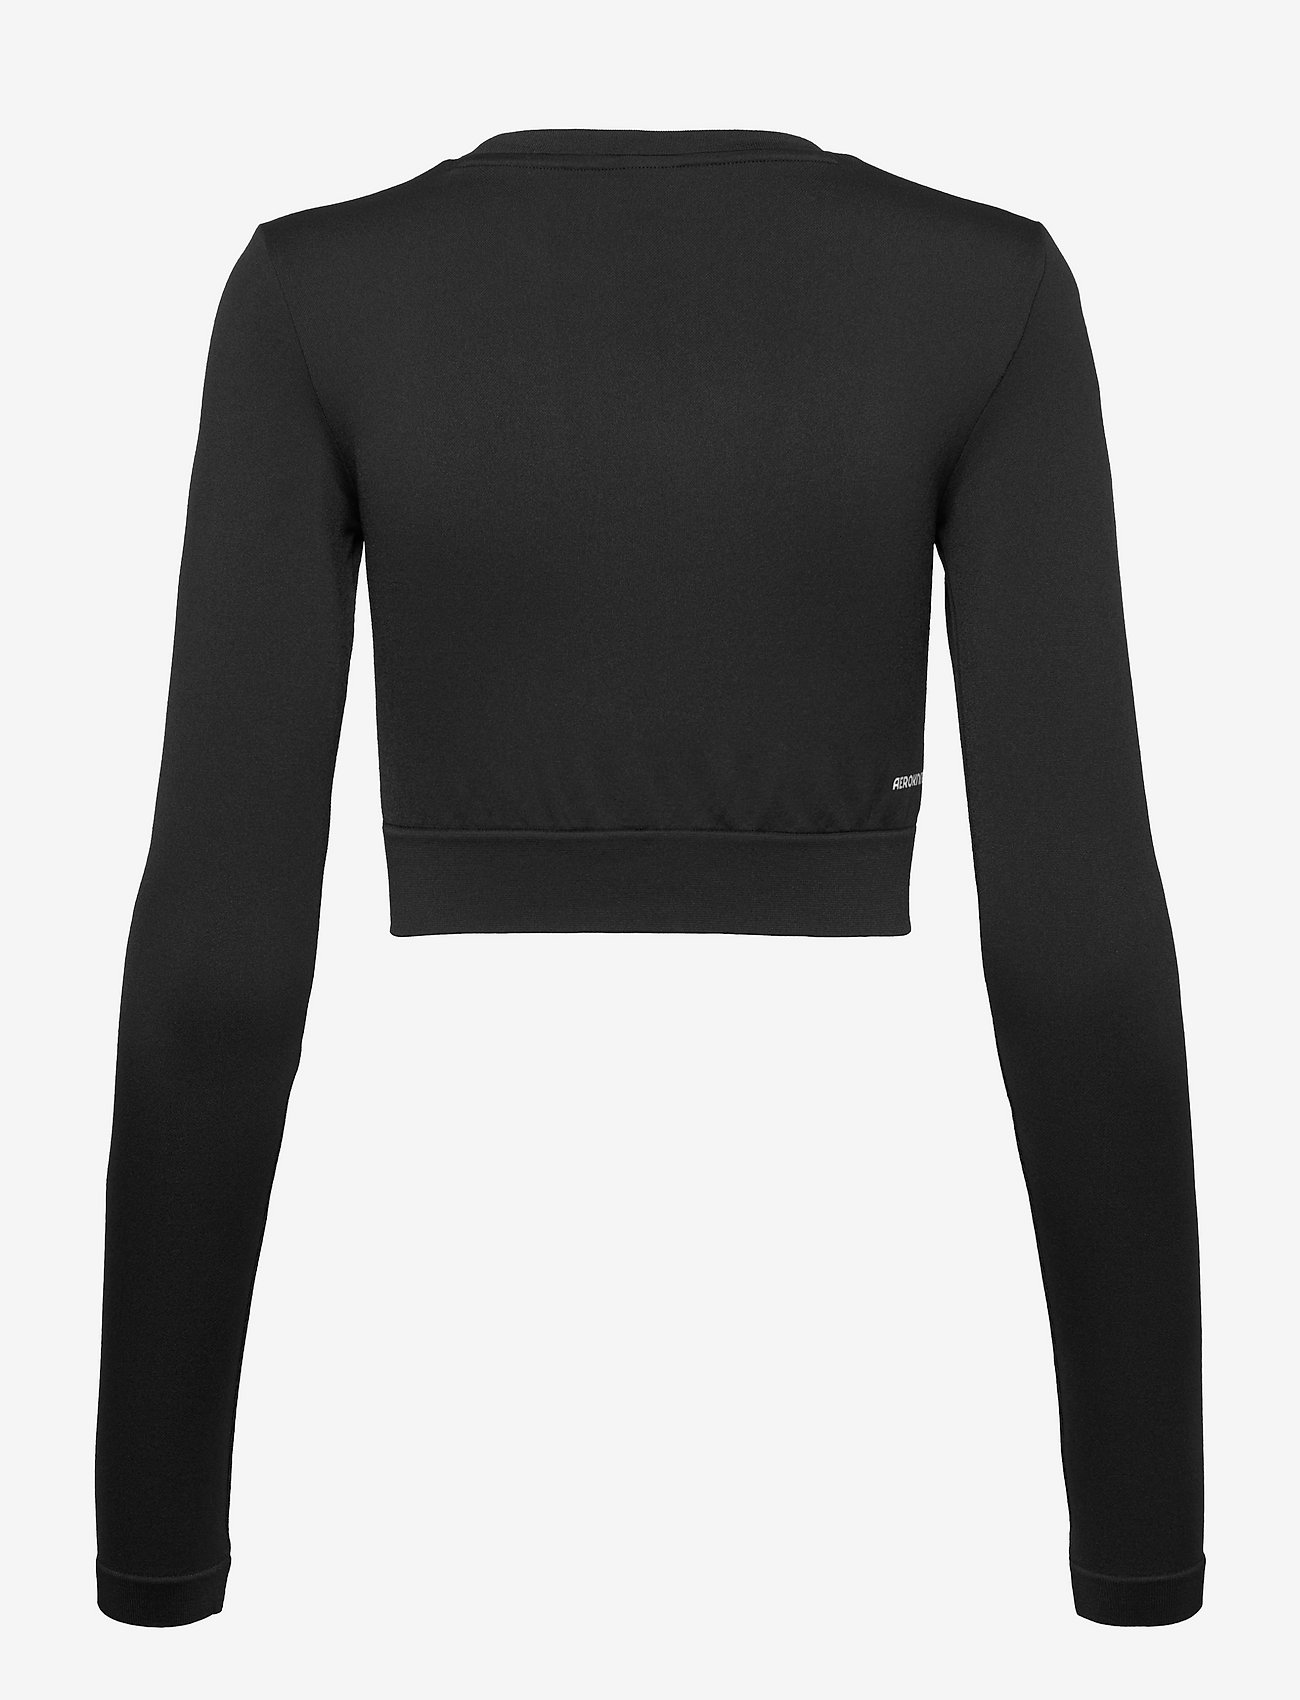 adidas Performance - adidas AEROKNIT Seamless Fitted Cropped Long-Sleeve Top - crop tops - black/white - 1